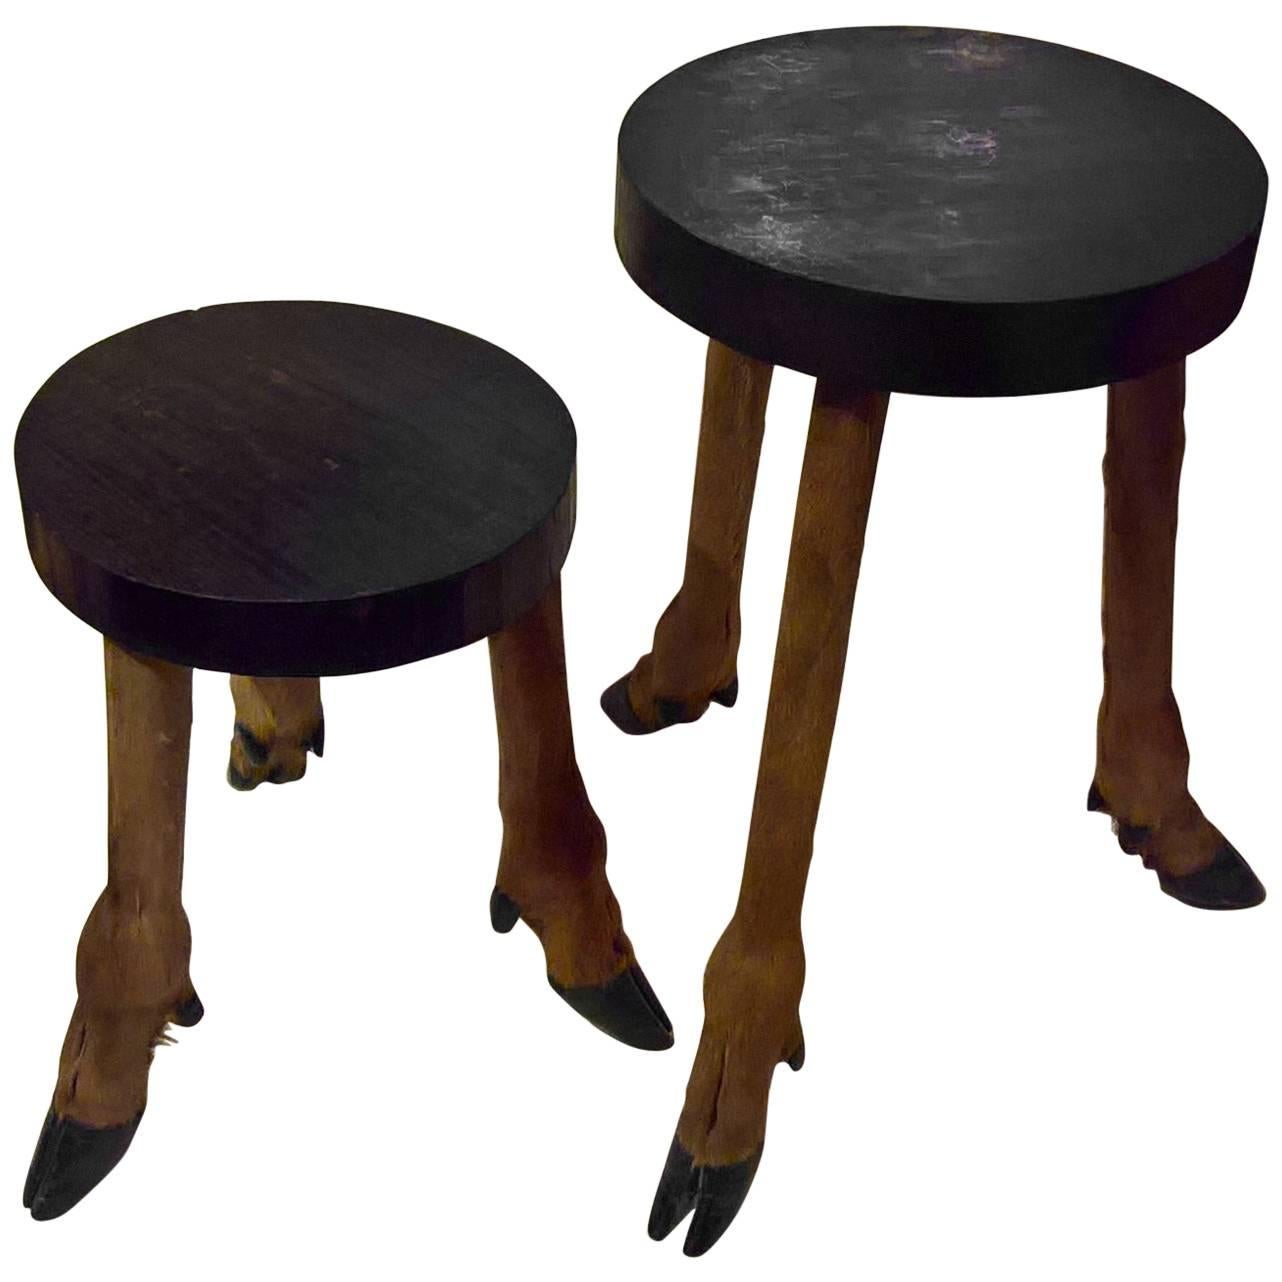 Rustic Pair of Side Tables with Taxidermy Legs